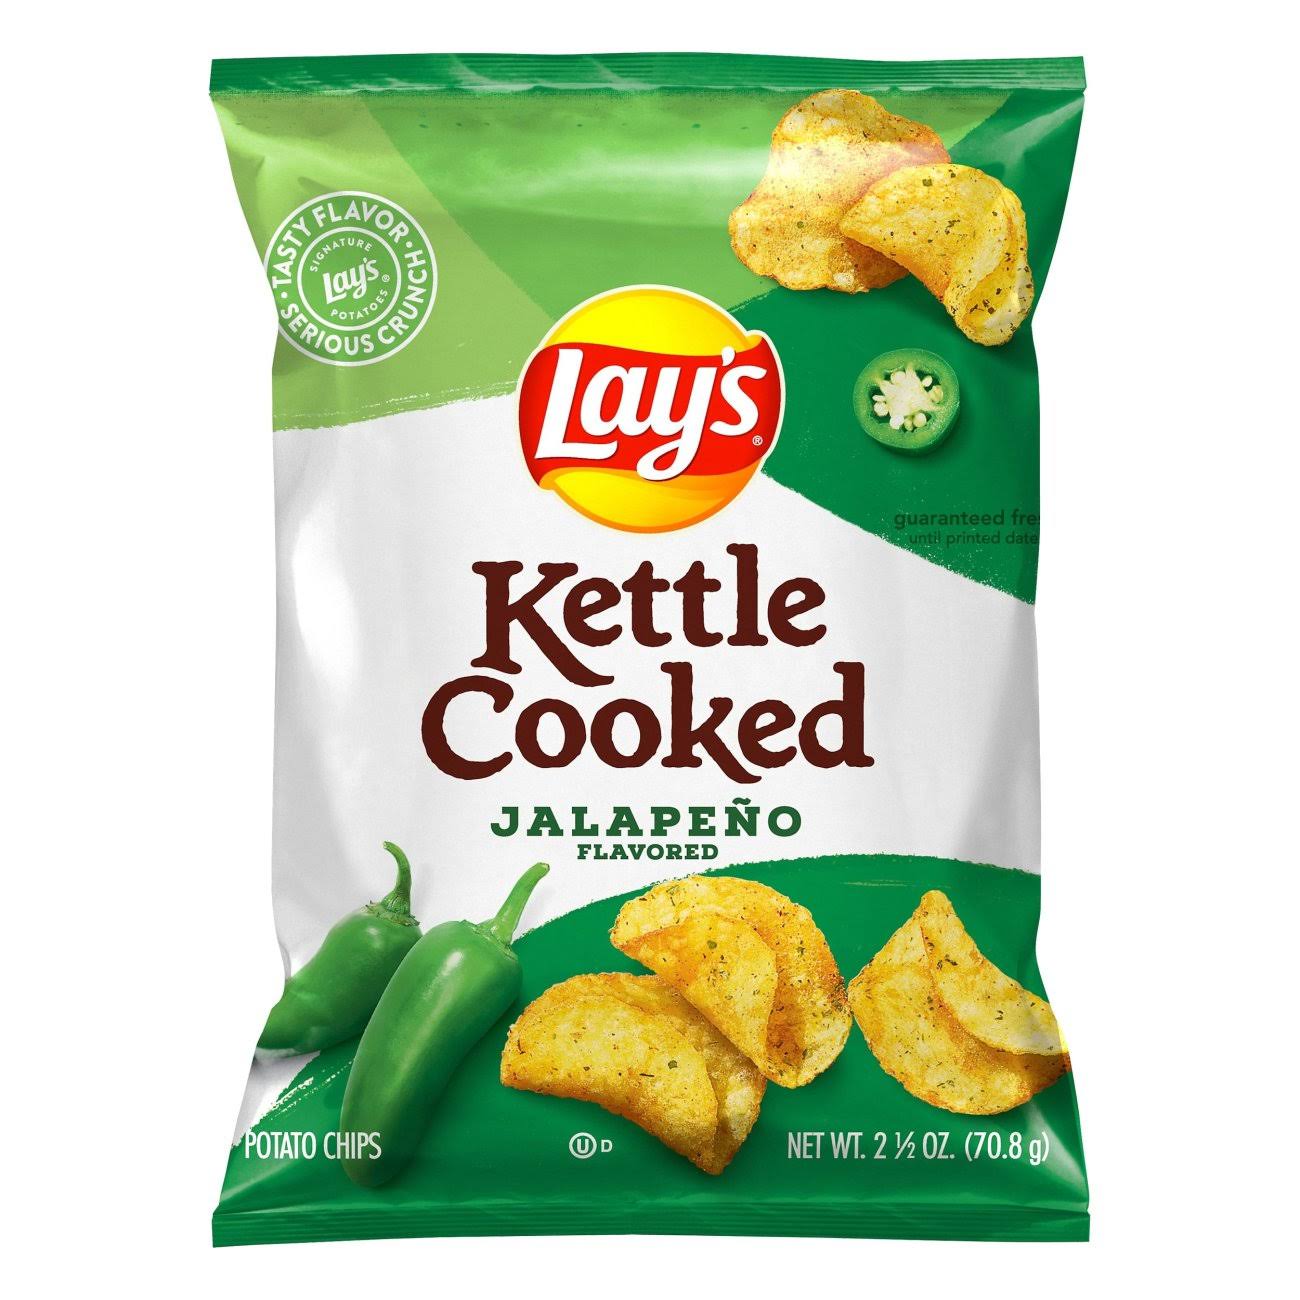 Lay's Kettle Cooked Potato Chips, Jalapeno Flavored - 2.5 oz